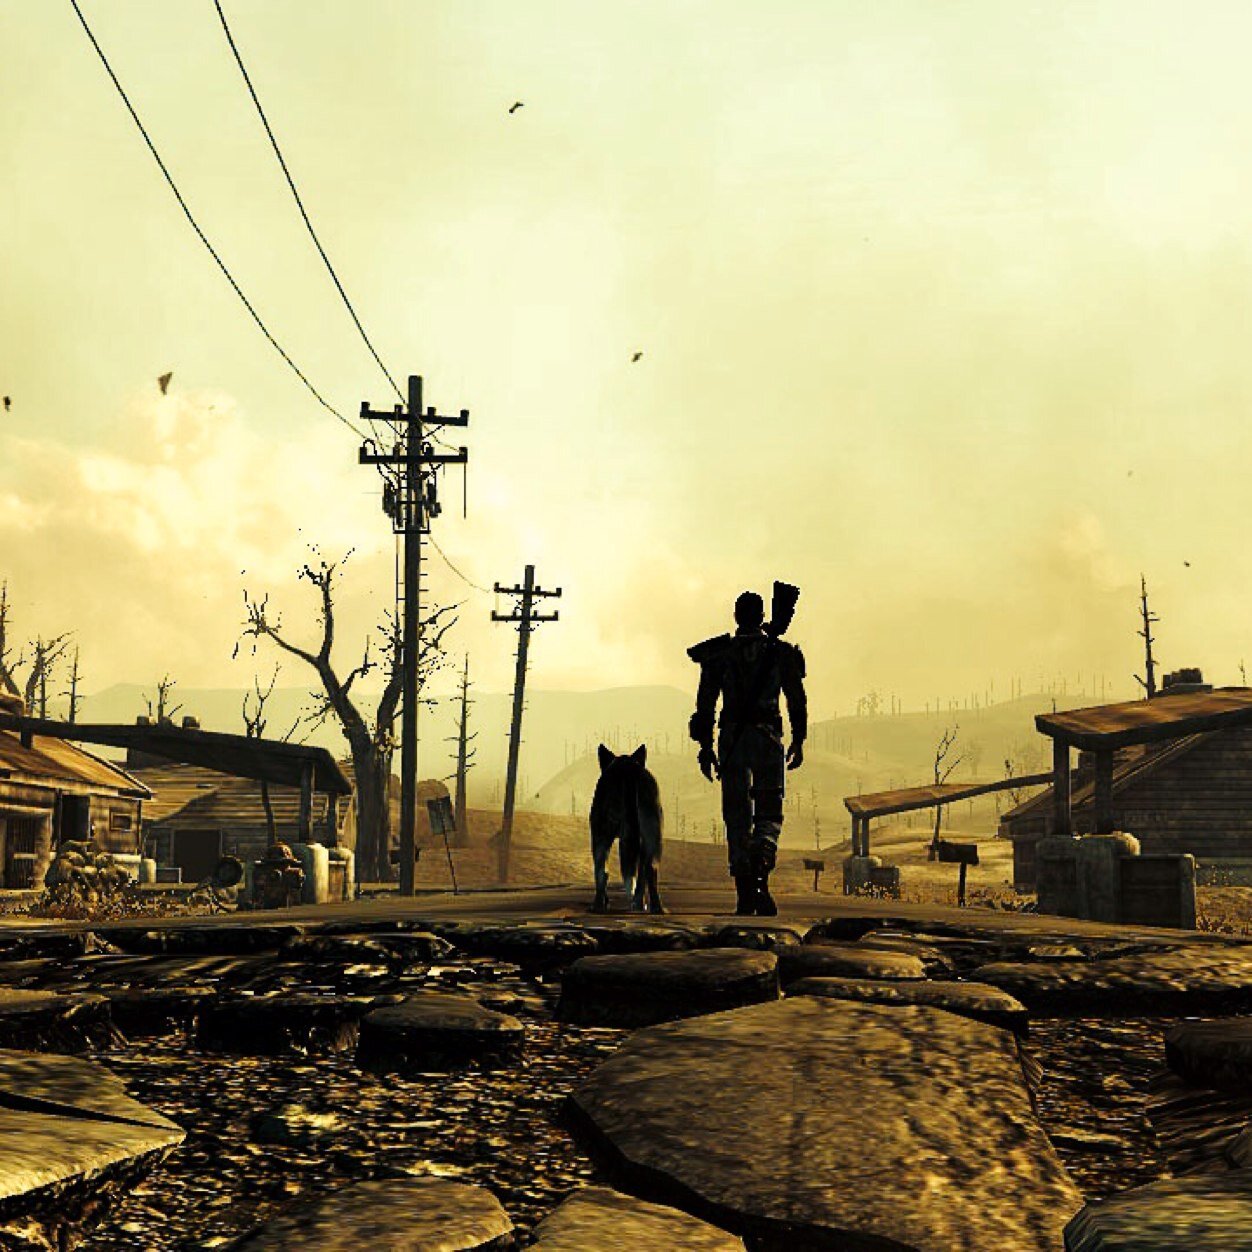 Is fallout 4 out or has it been announced?